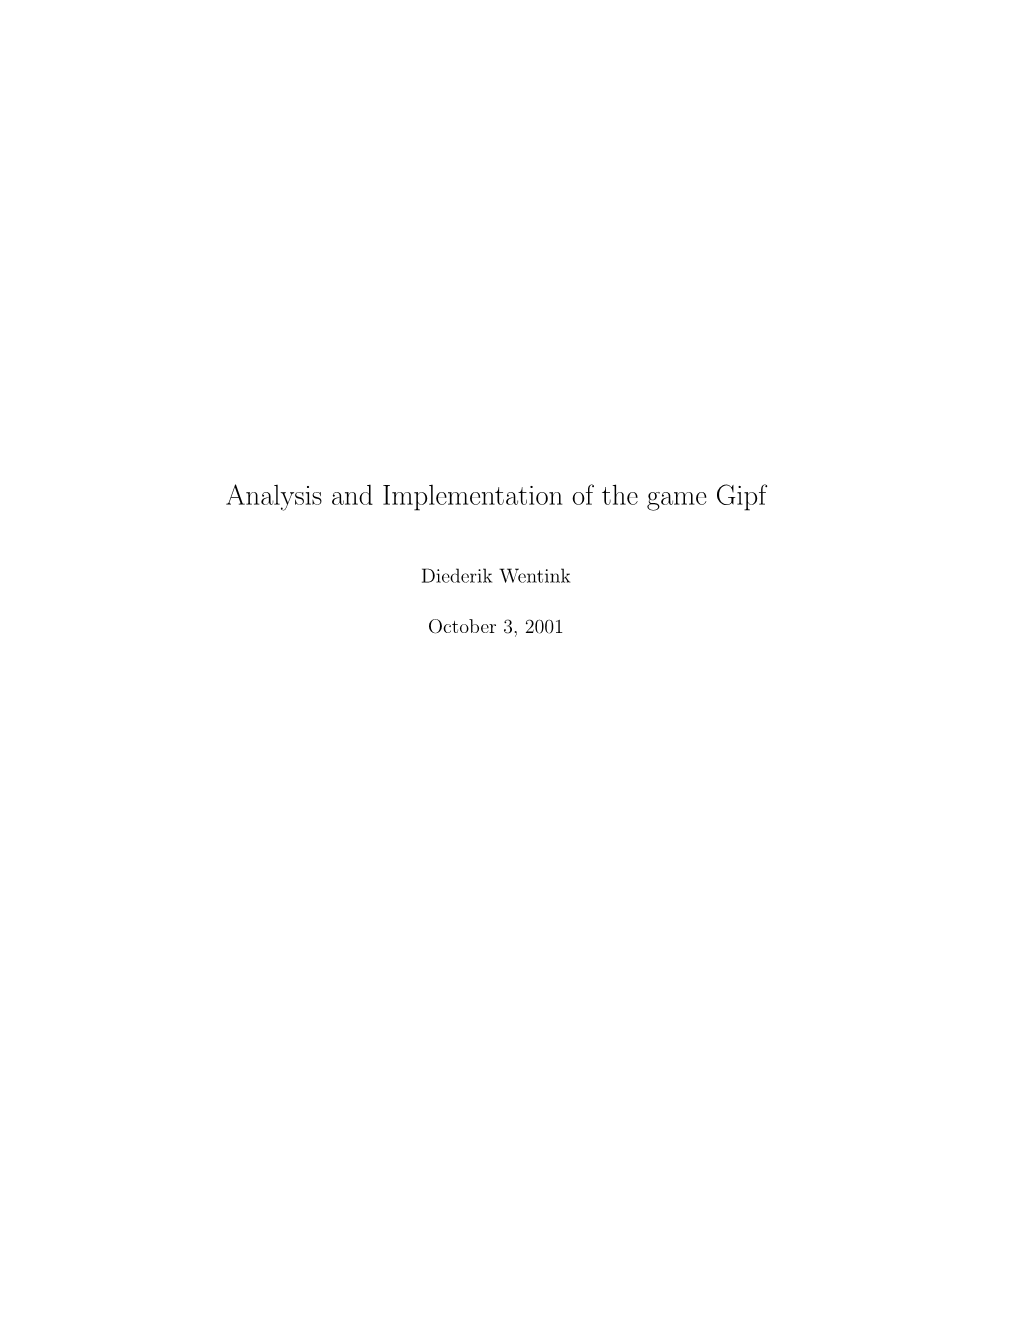 Analysis and Implementation of the Game Gipf